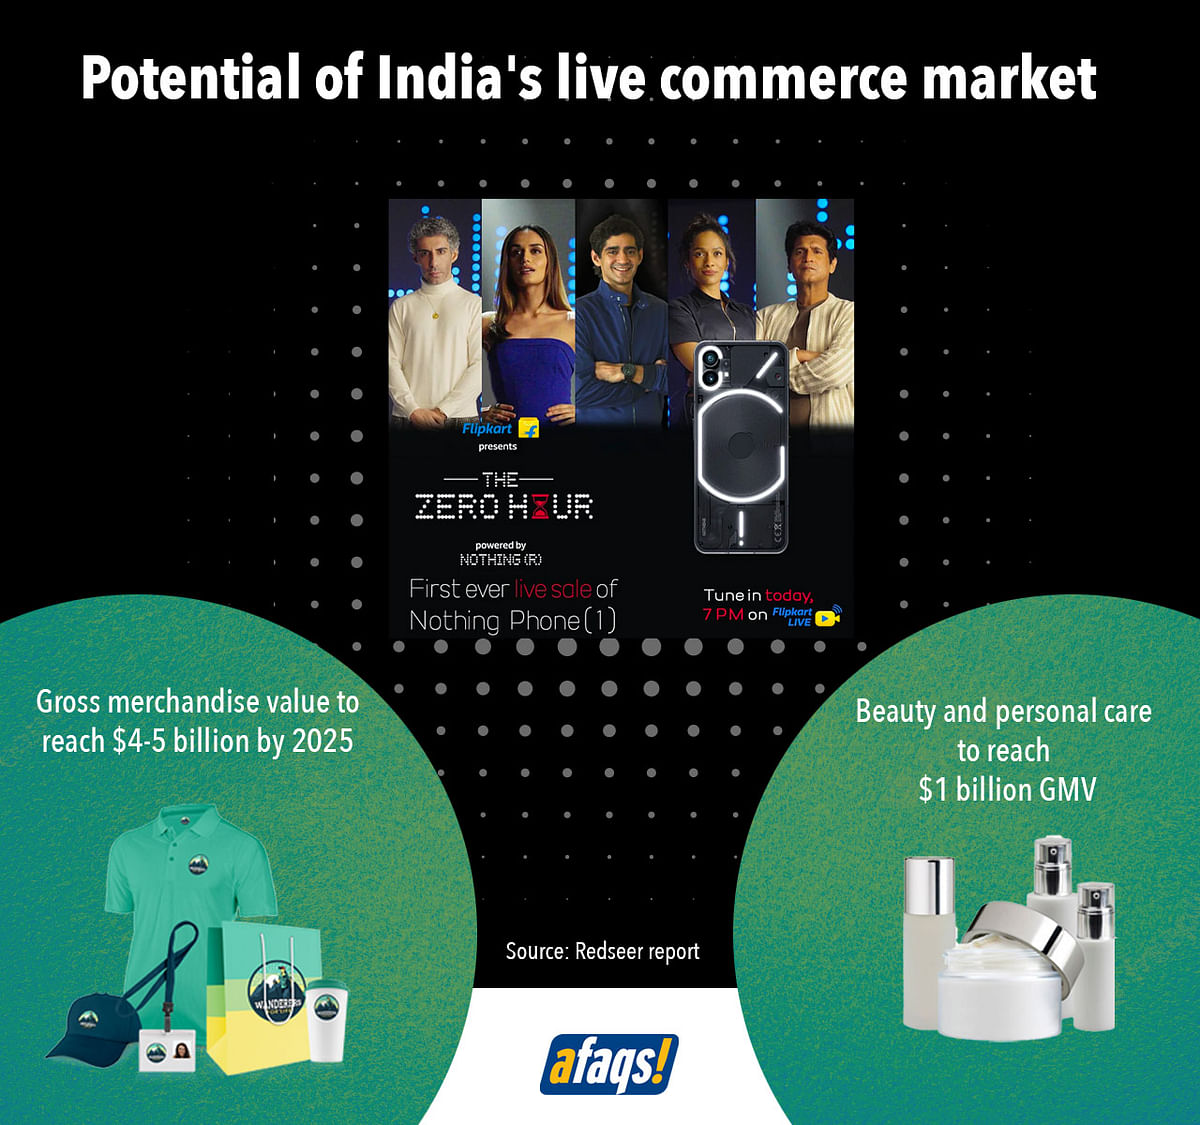 Indian e-commerce players take baby steps in live commerce market